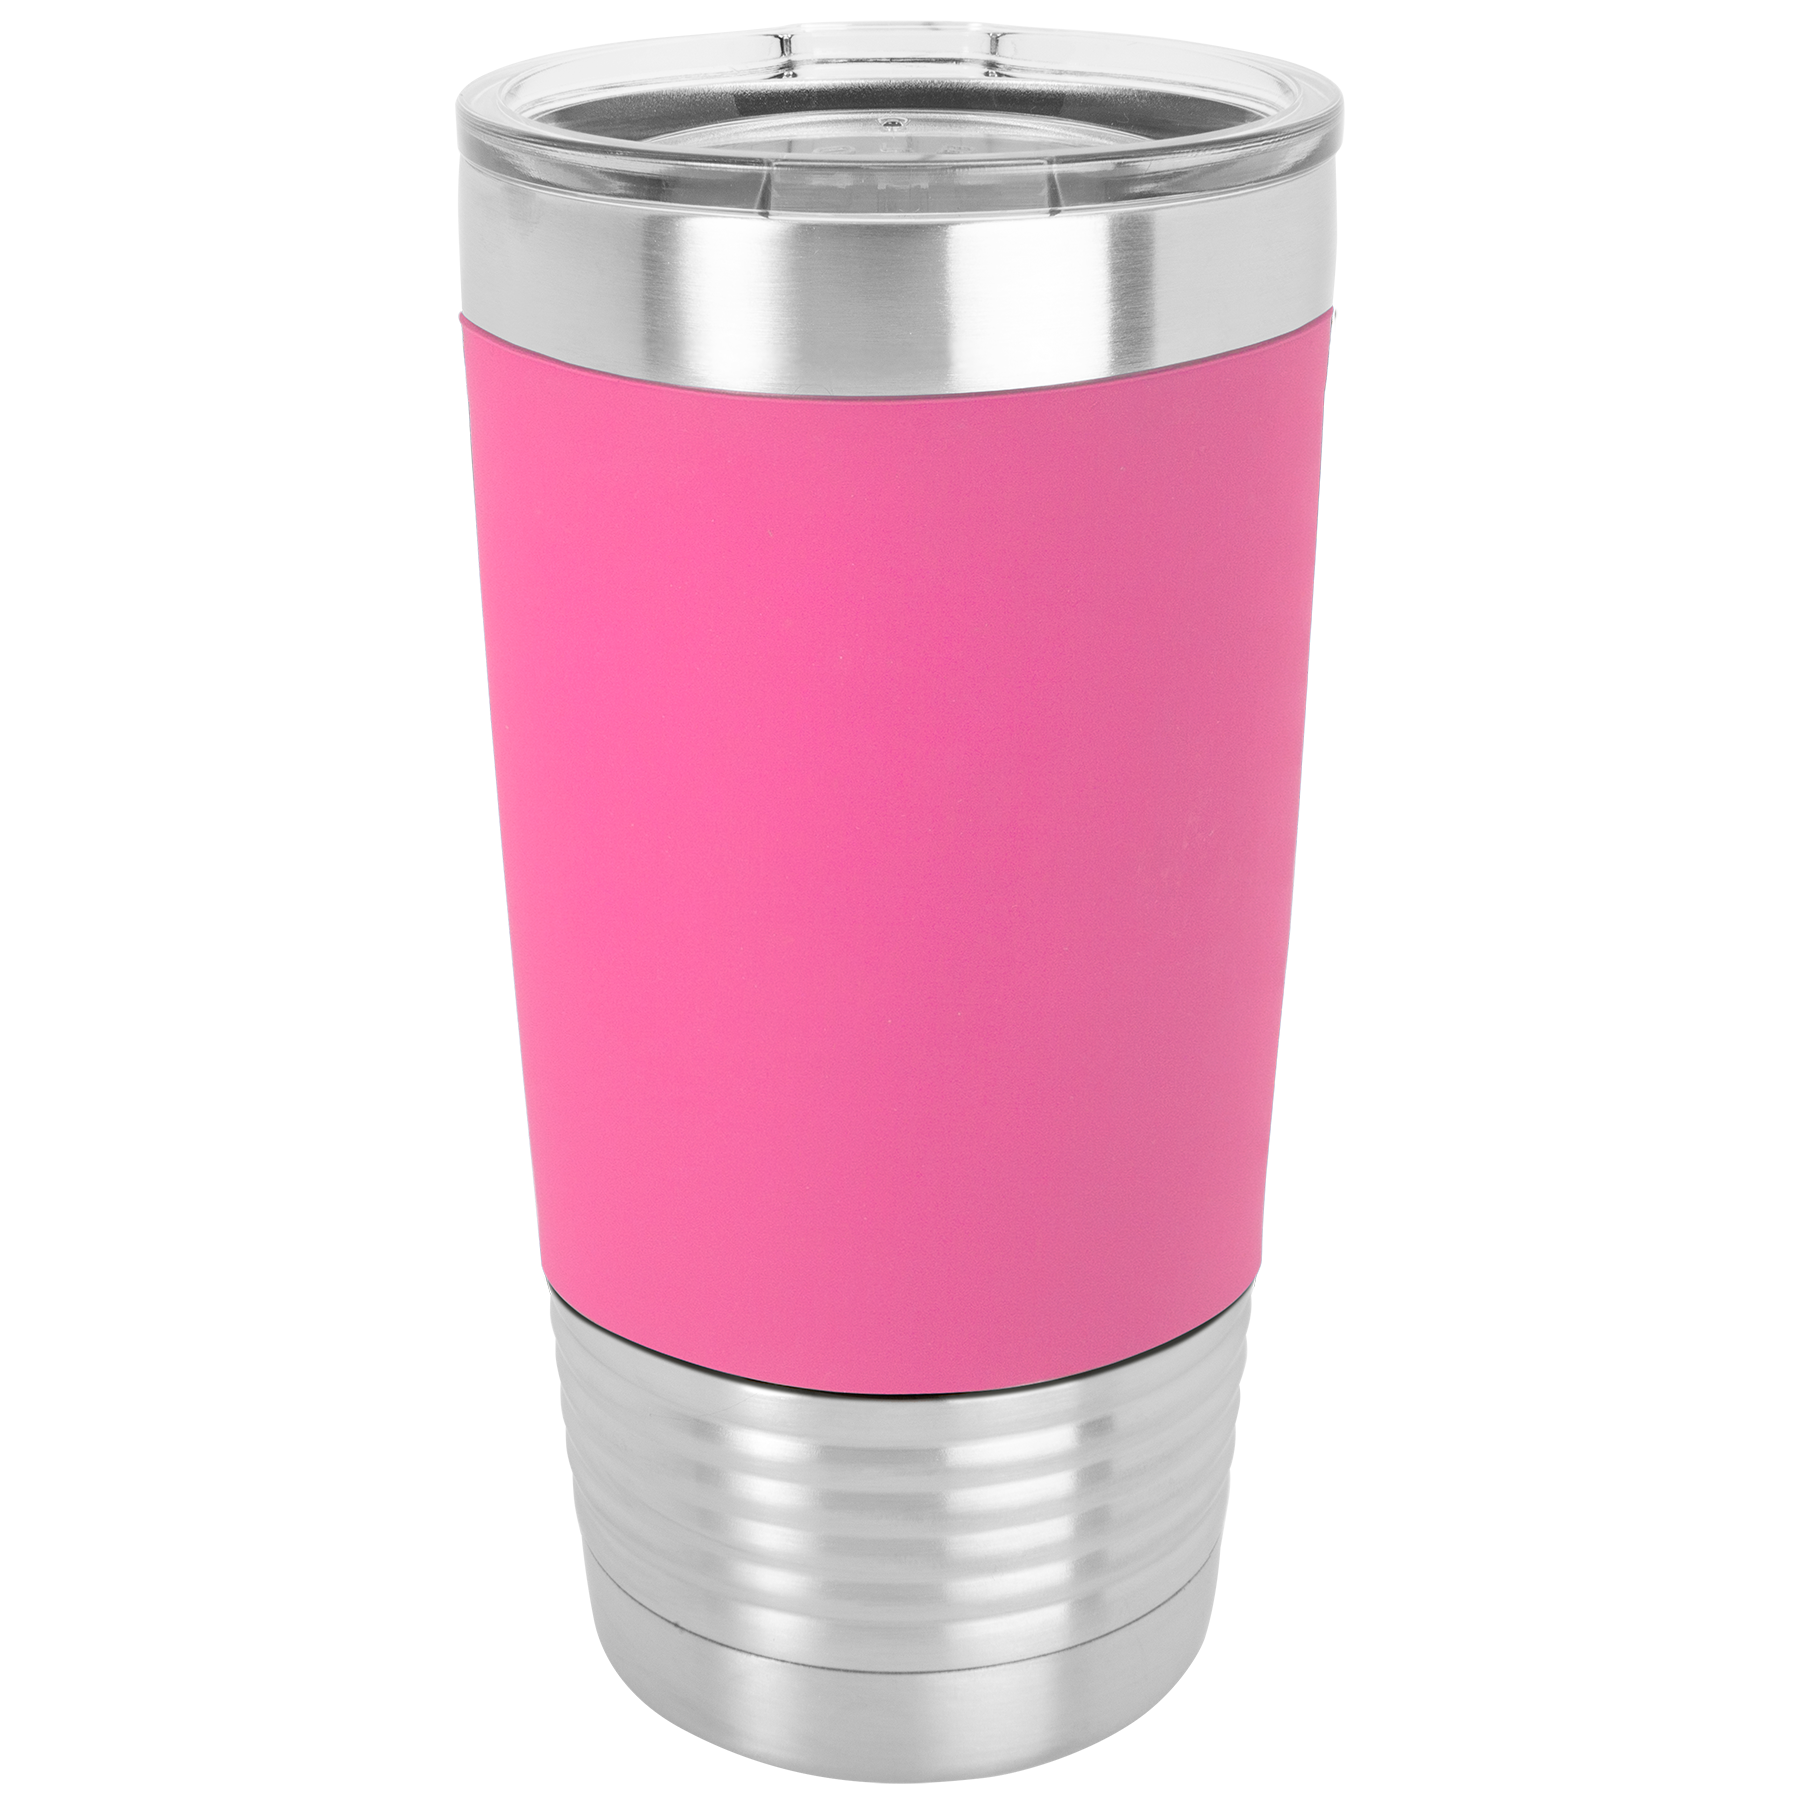 Pink Engraves to Black 20oz Silicone Grip Tumbler -One Free Engraving -Double-wall Vacuum Insulated -Made from 18/8 Gauge Stainless Steel (Type 304 Food Grade) -Lid is BPA Free (Hand Wash Only) -Not recommended for Dishwasher -Silicone Sleeve is Removable -Works with Cold and Hot Drinks -7 Color Options -Perfect for Personalized Gifts, Awards, Incentives, Swag & Fundraisers